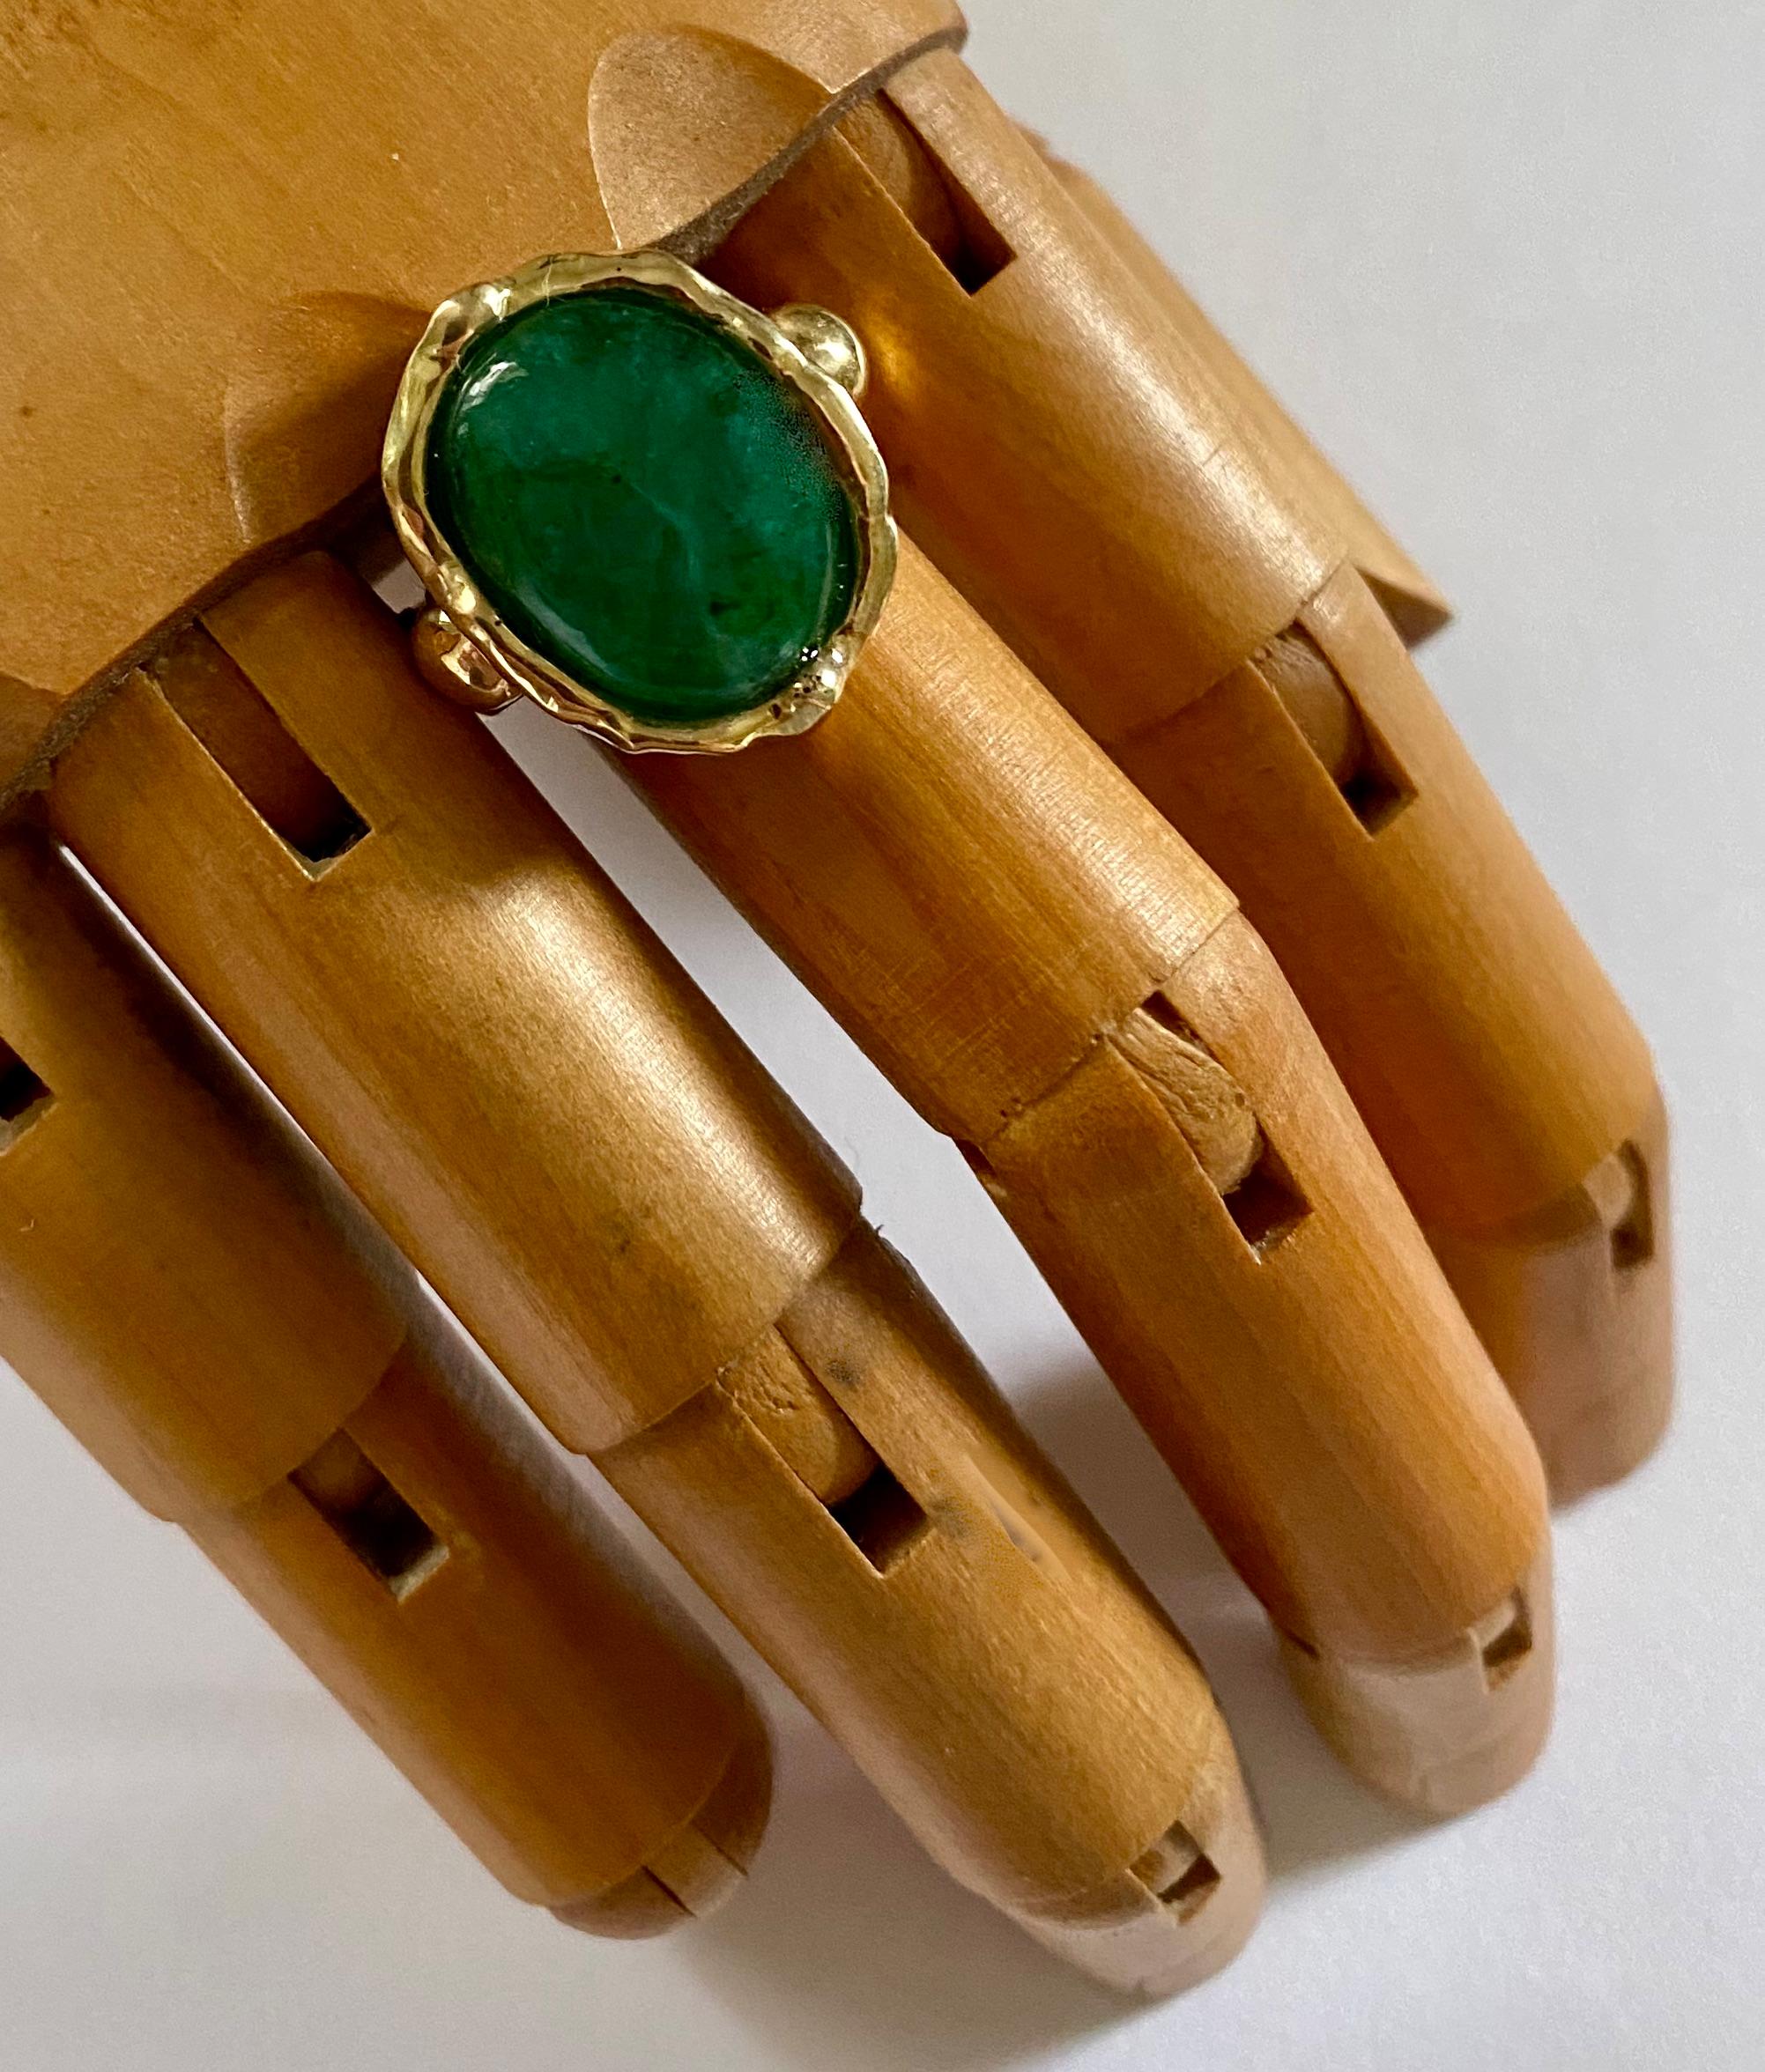 Zambian emerald is featured in this archaic style ring.  The emerald is cabochon cut.  It possesses a rich green color, is semi-transparent and is well cut and polished.  It is set in a ring sculpted in 18k yellow gold.  The style if the mounting